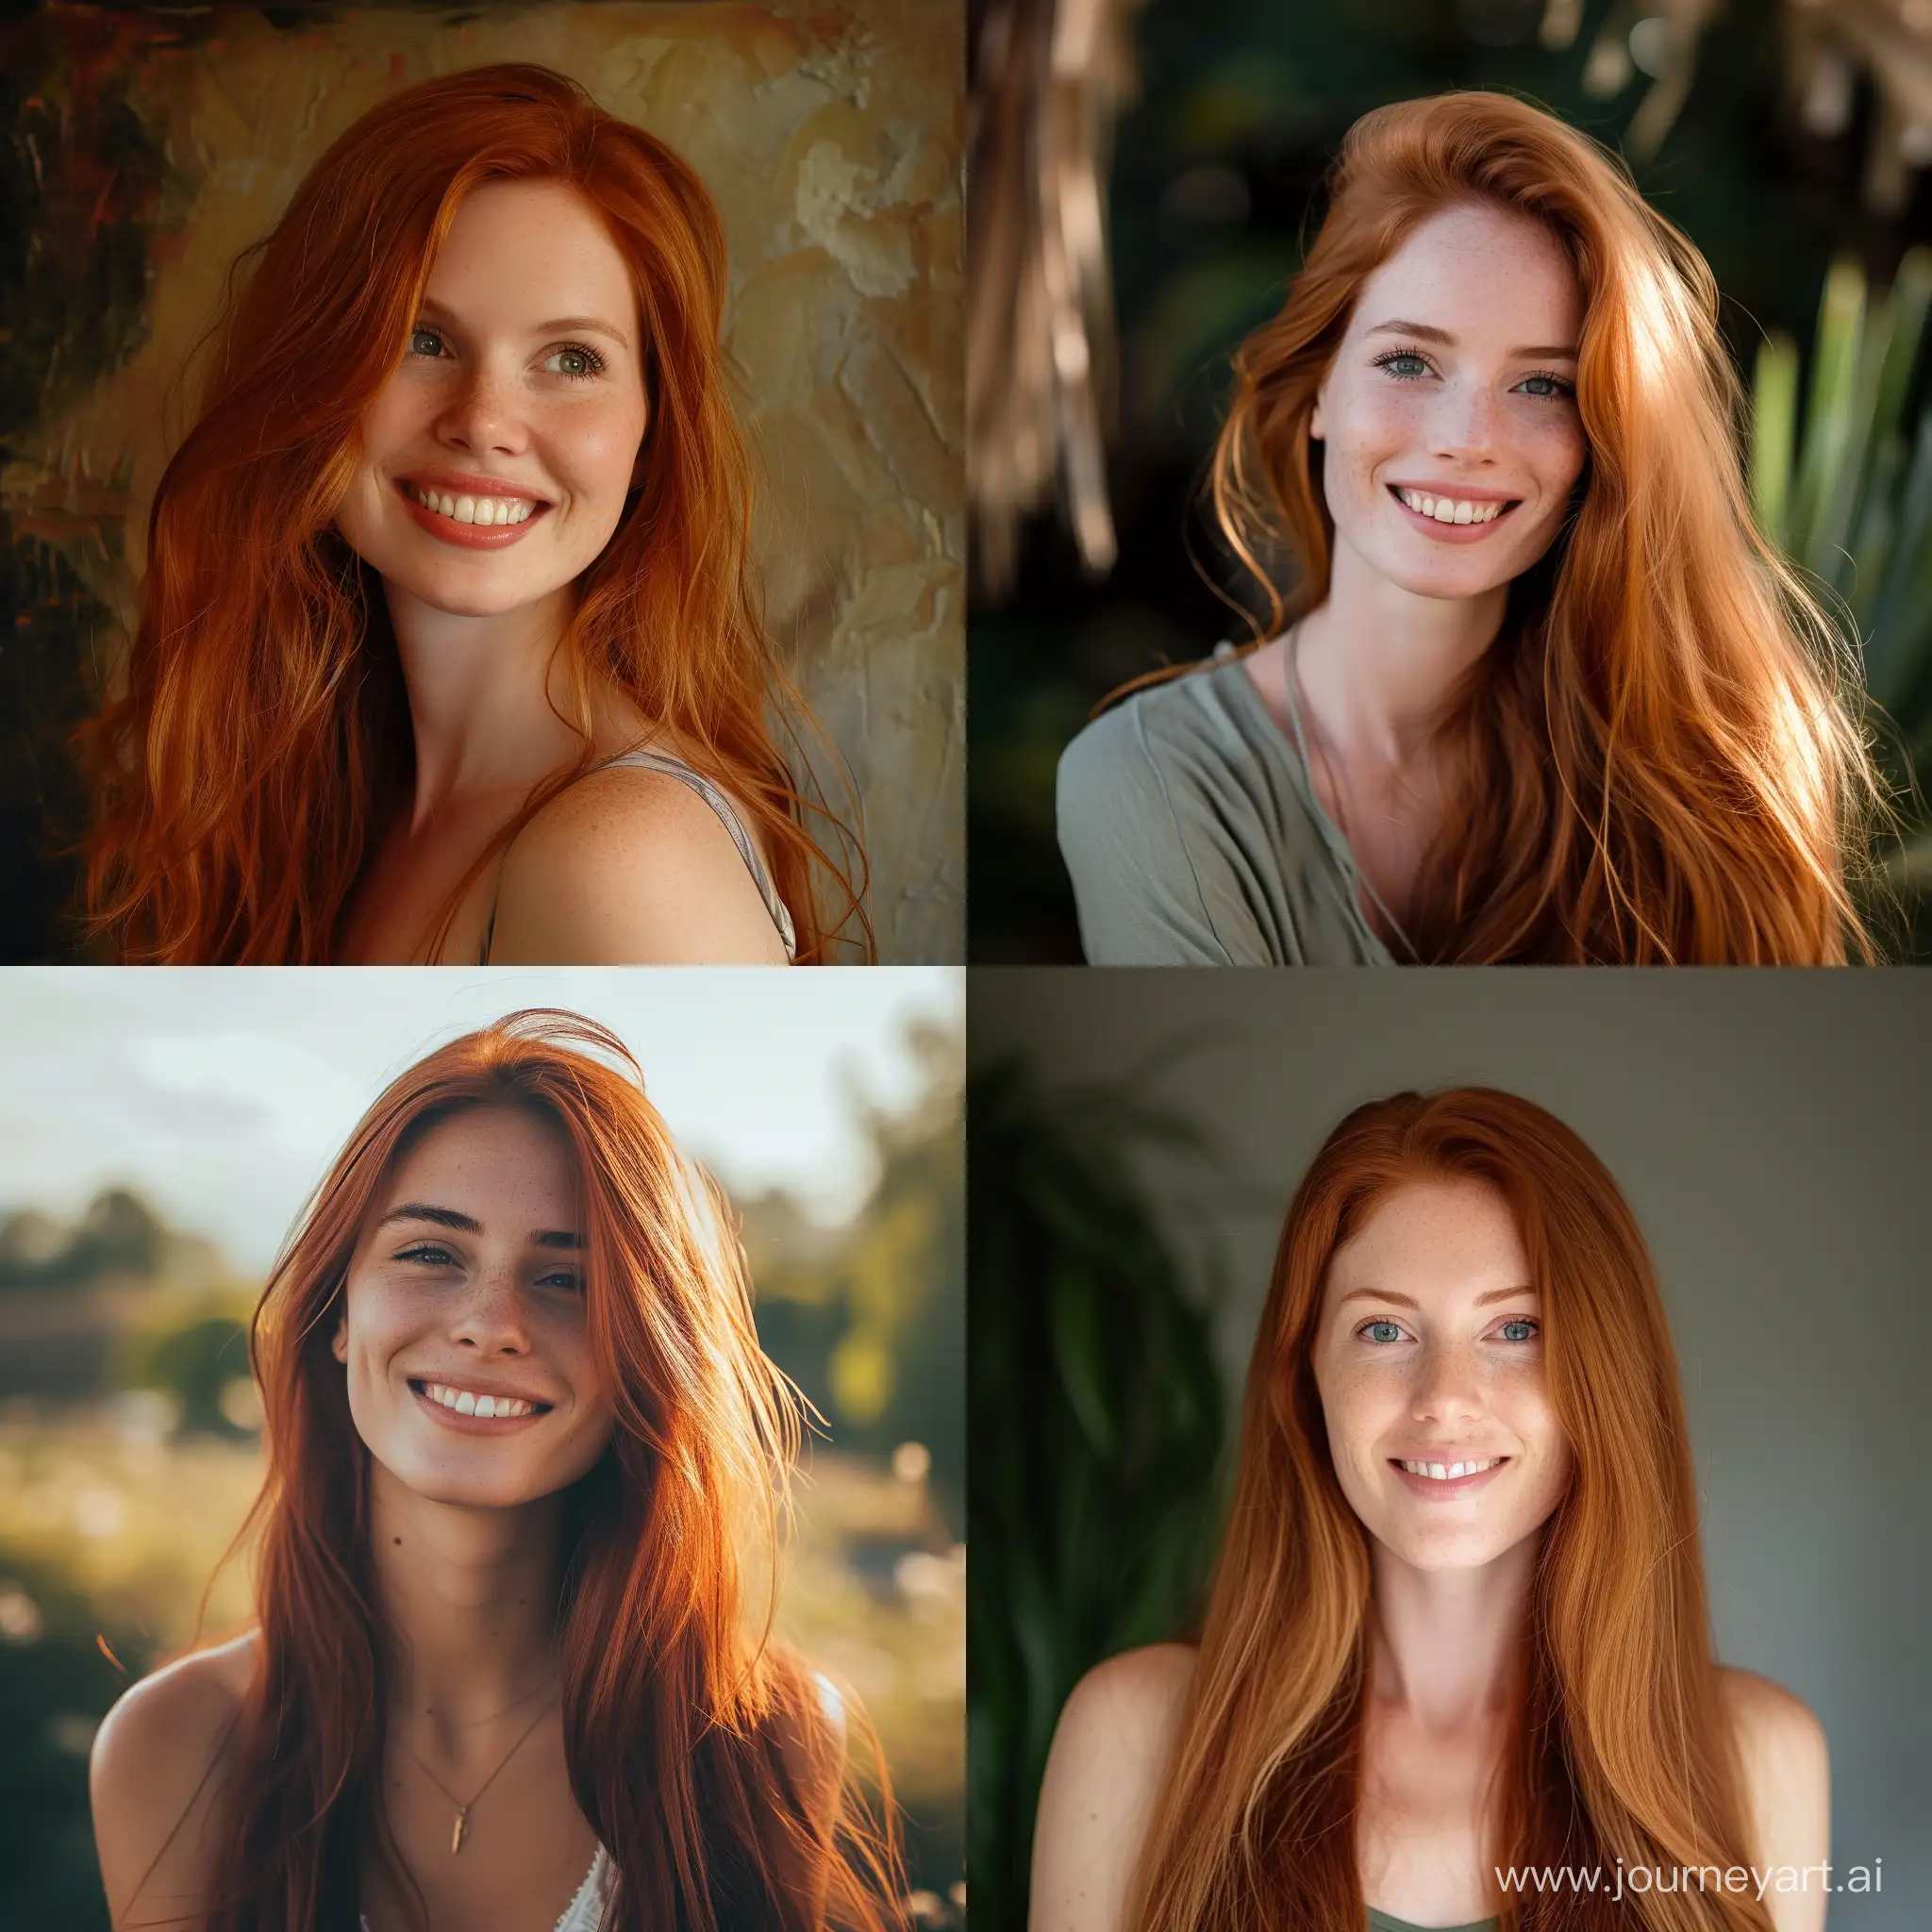 Radiant-RedHaired-Woman-Portrait-with-Joyful-Smile